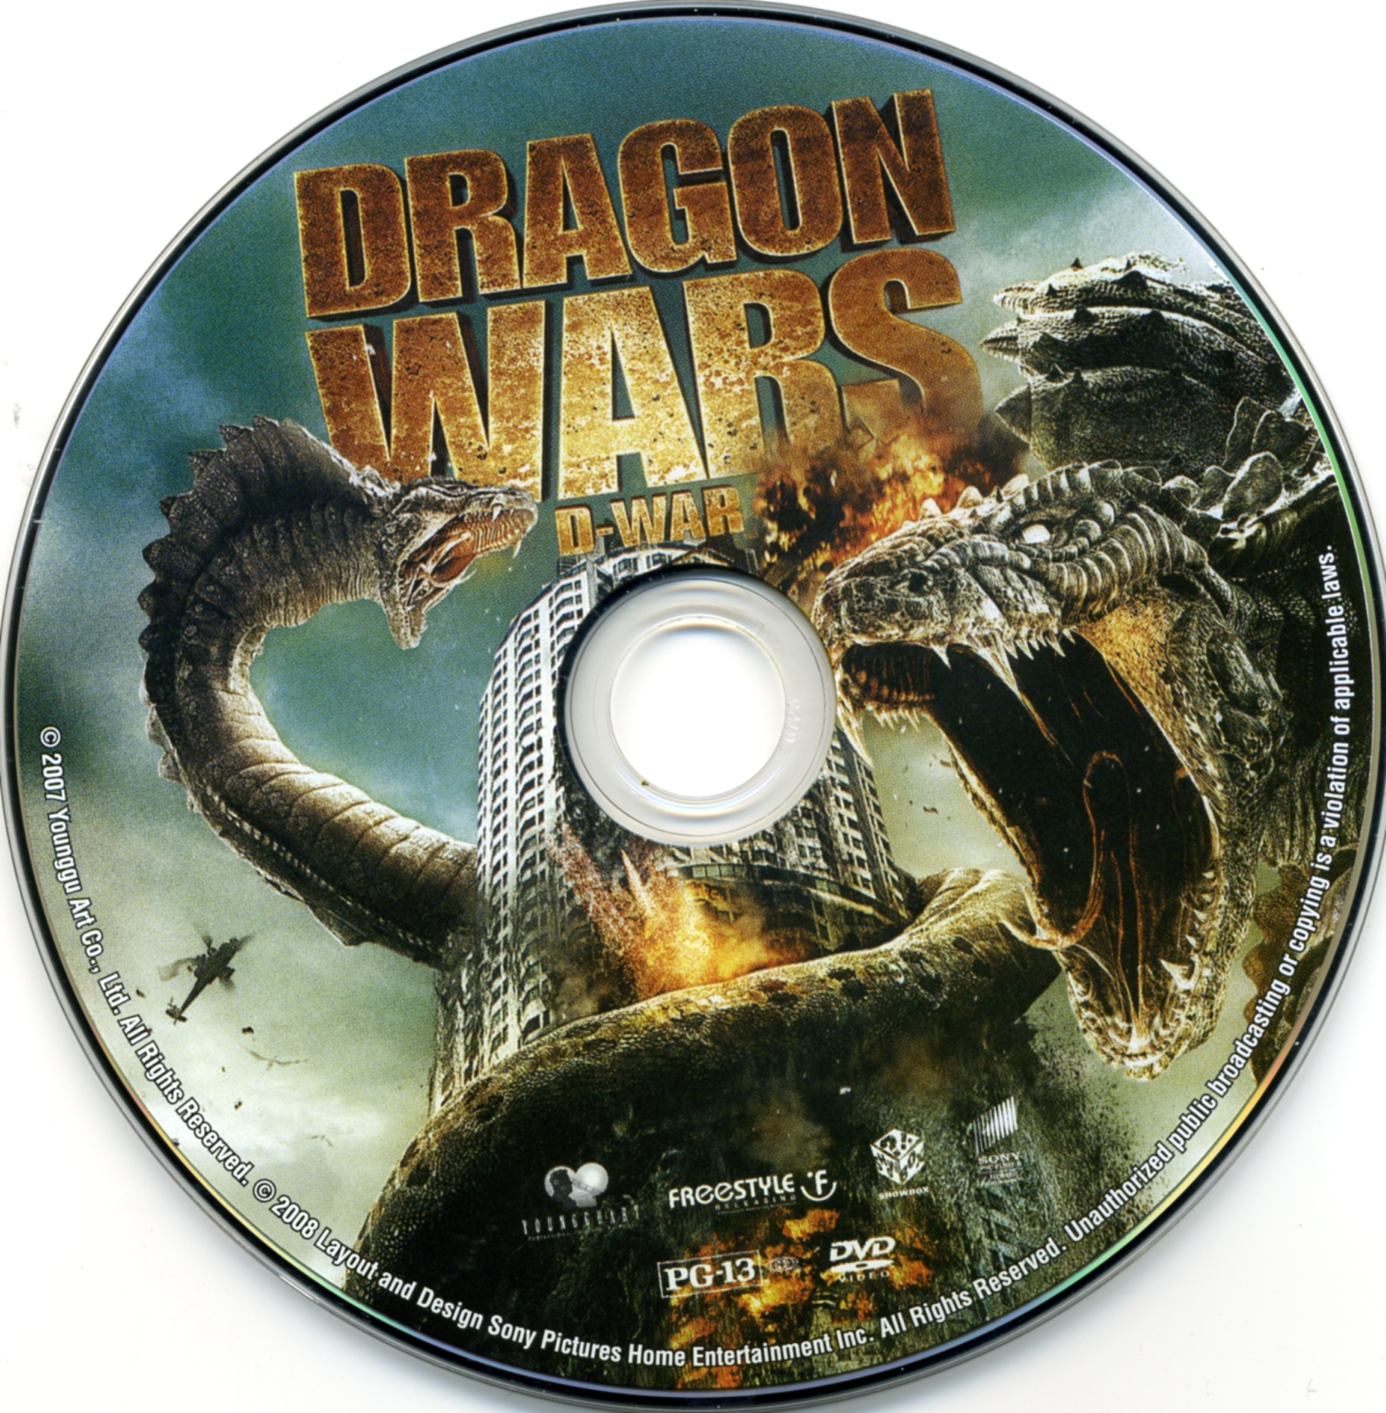 instal the last version for apple Dragon Wars